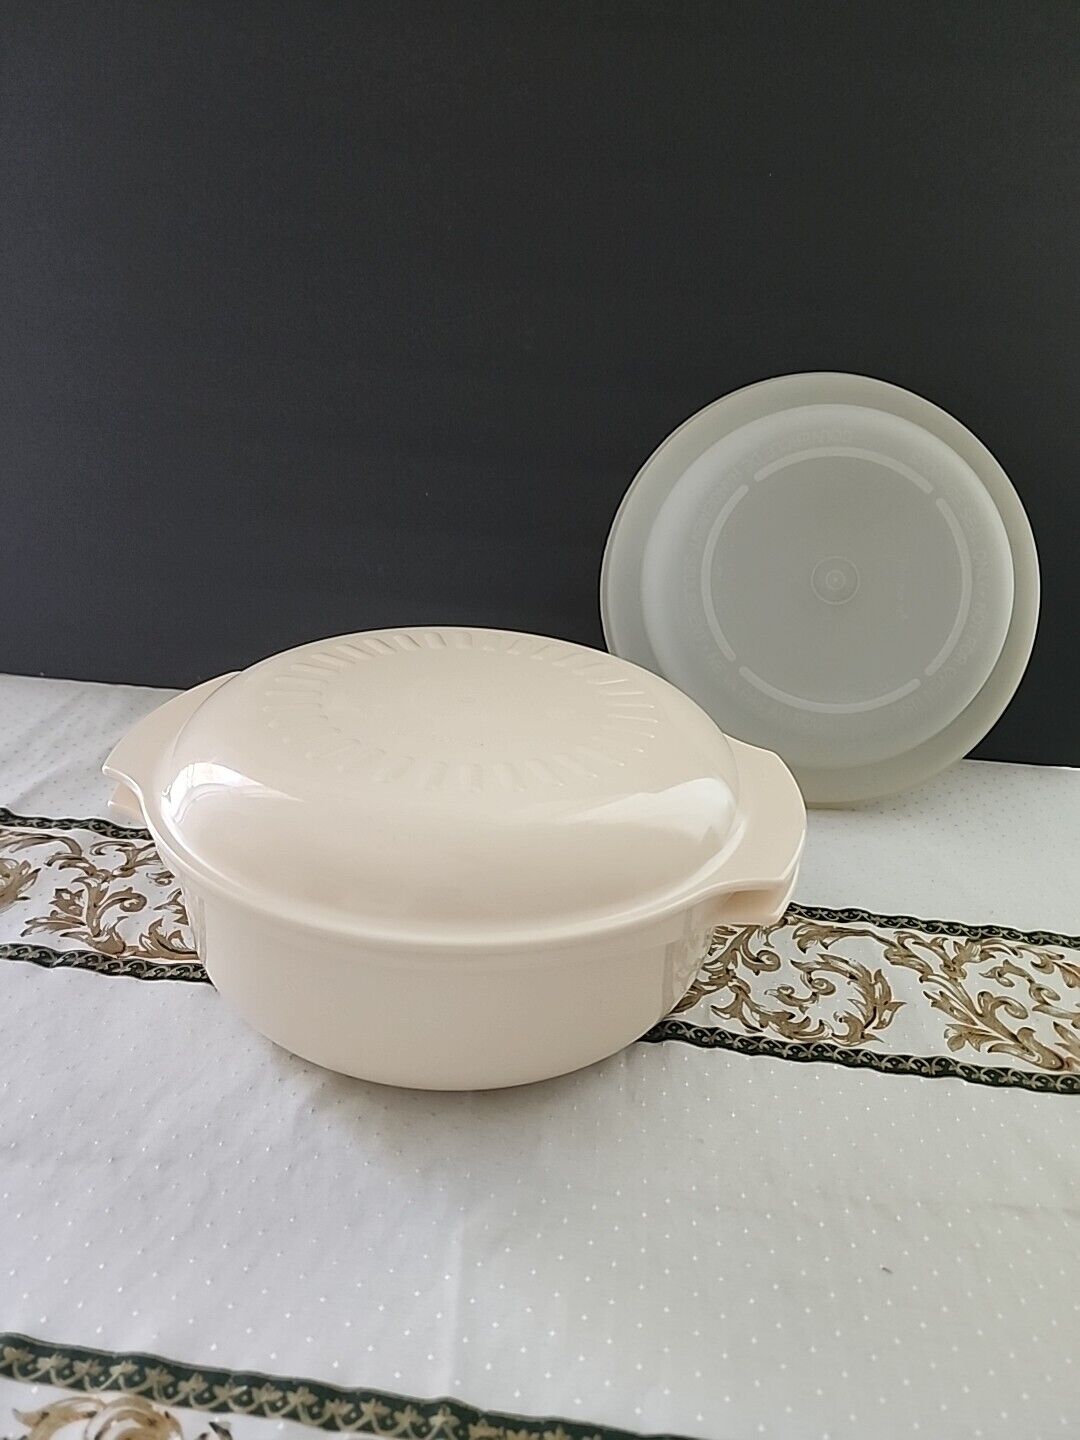 Vintage TUPPERWARE #1748 3 PCS ULTRA 21 4 &2 CUPS CASSEROLE DISH BOWL WITH LID